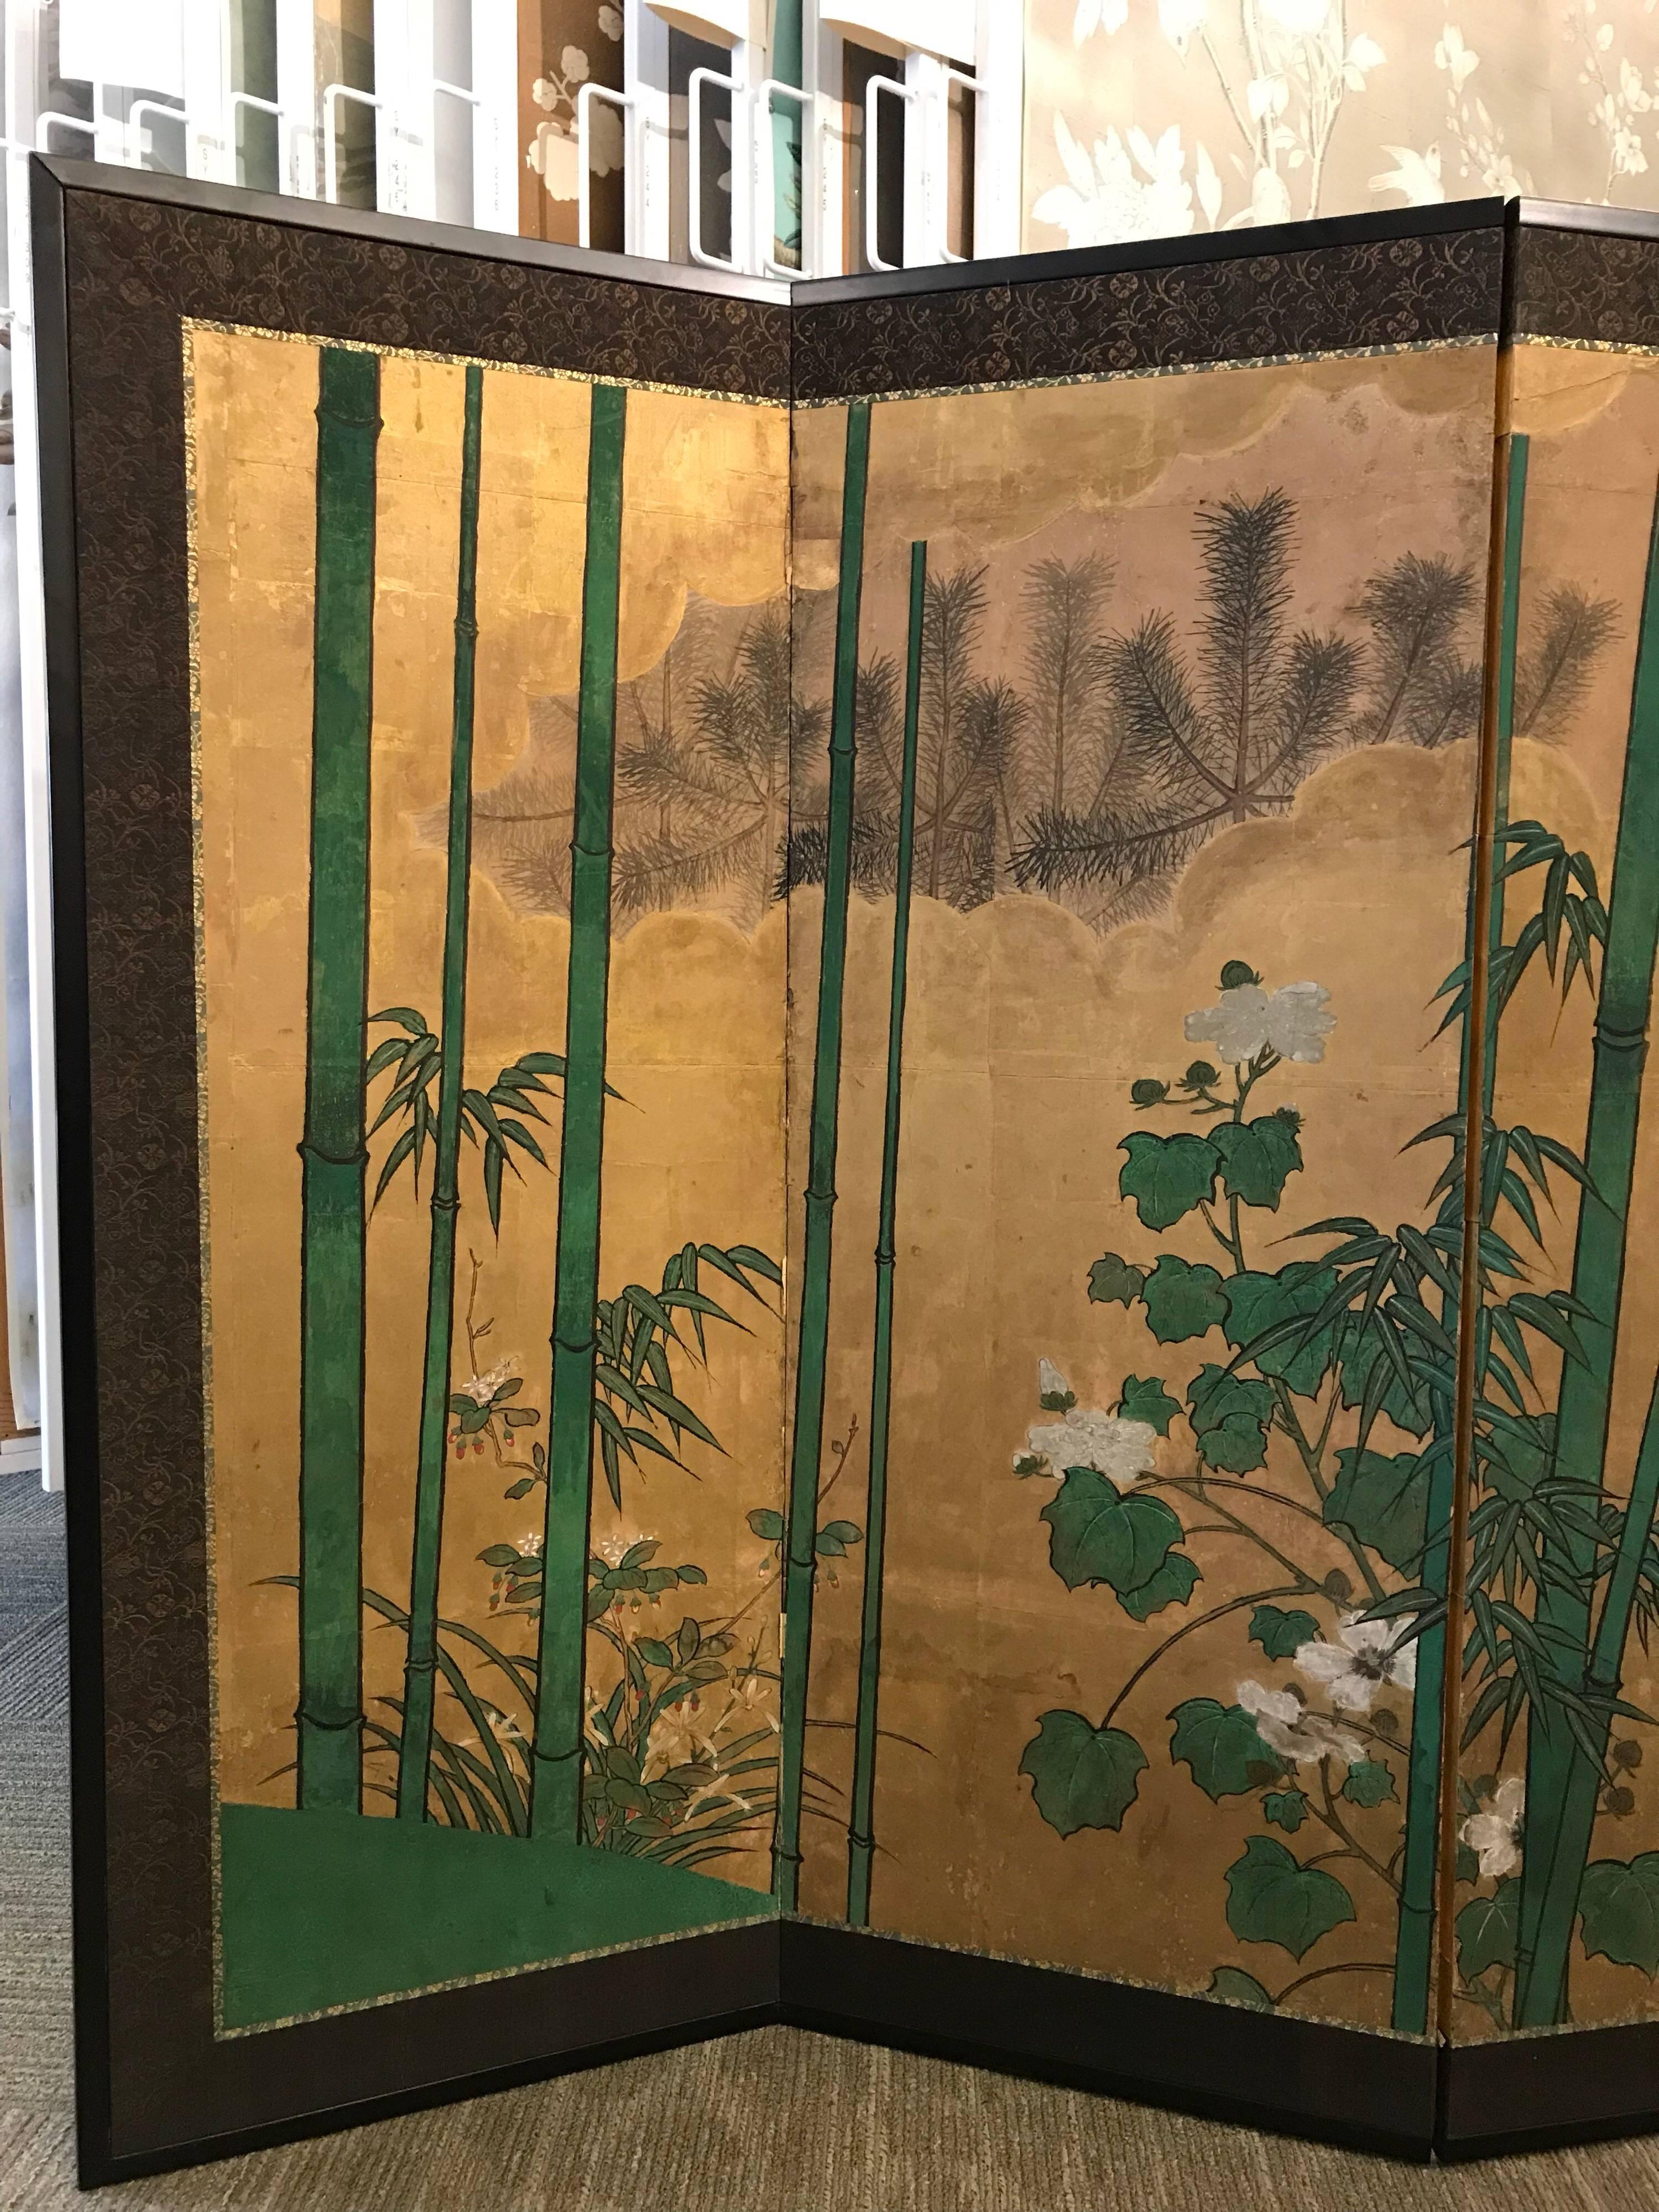 A 19th century eight panel Japanese screen with bamboo, pines, and gold leaf clouds.